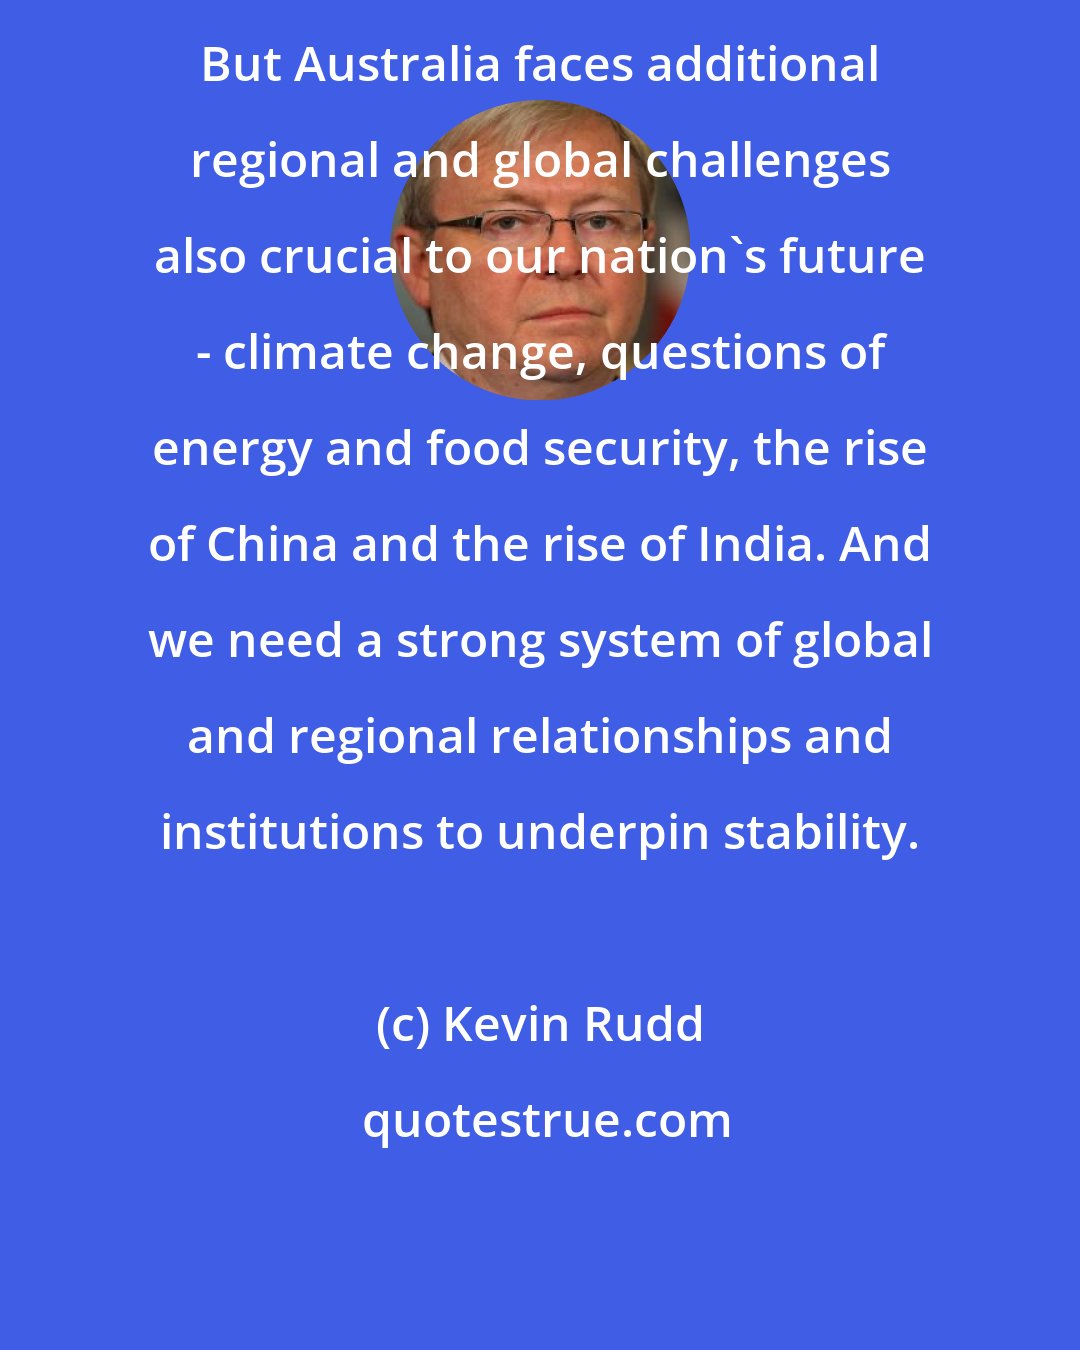 Kevin Rudd: But Australia faces additional regional and global challenges also crucial to our nation's future - climate change, questions of energy and food security, the rise of China and the rise of India. And we need a strong system of global and regional relationships and institutions to underpin stability.